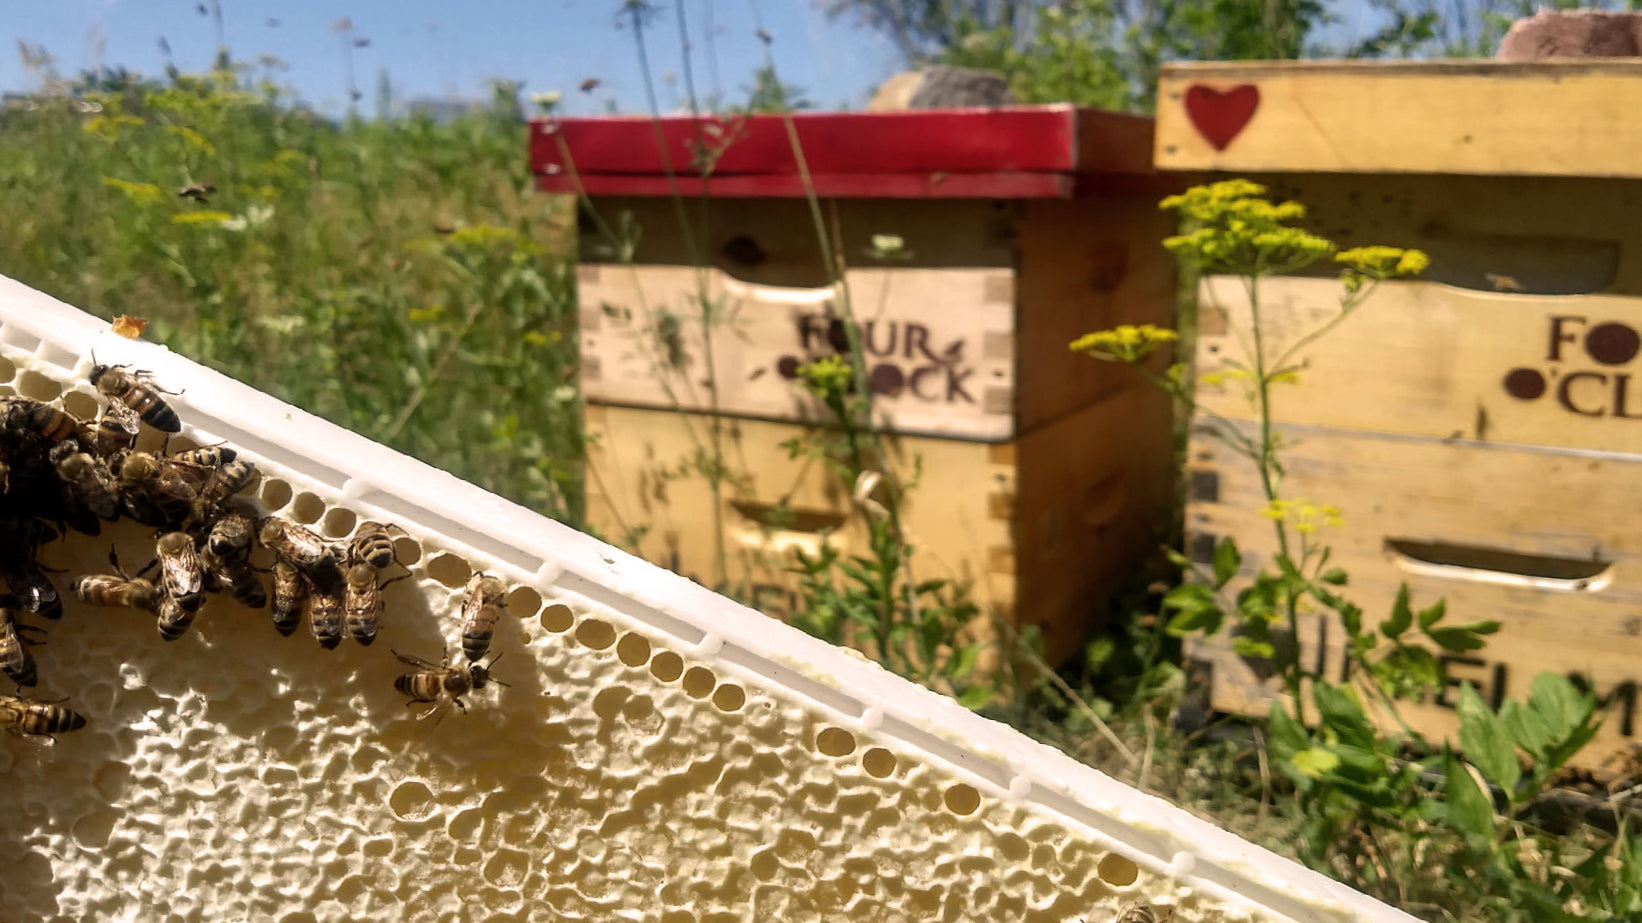 BENEFITS OF HONEY: DISCOVER THE FOUR O'CLOCK BEEHIVES!